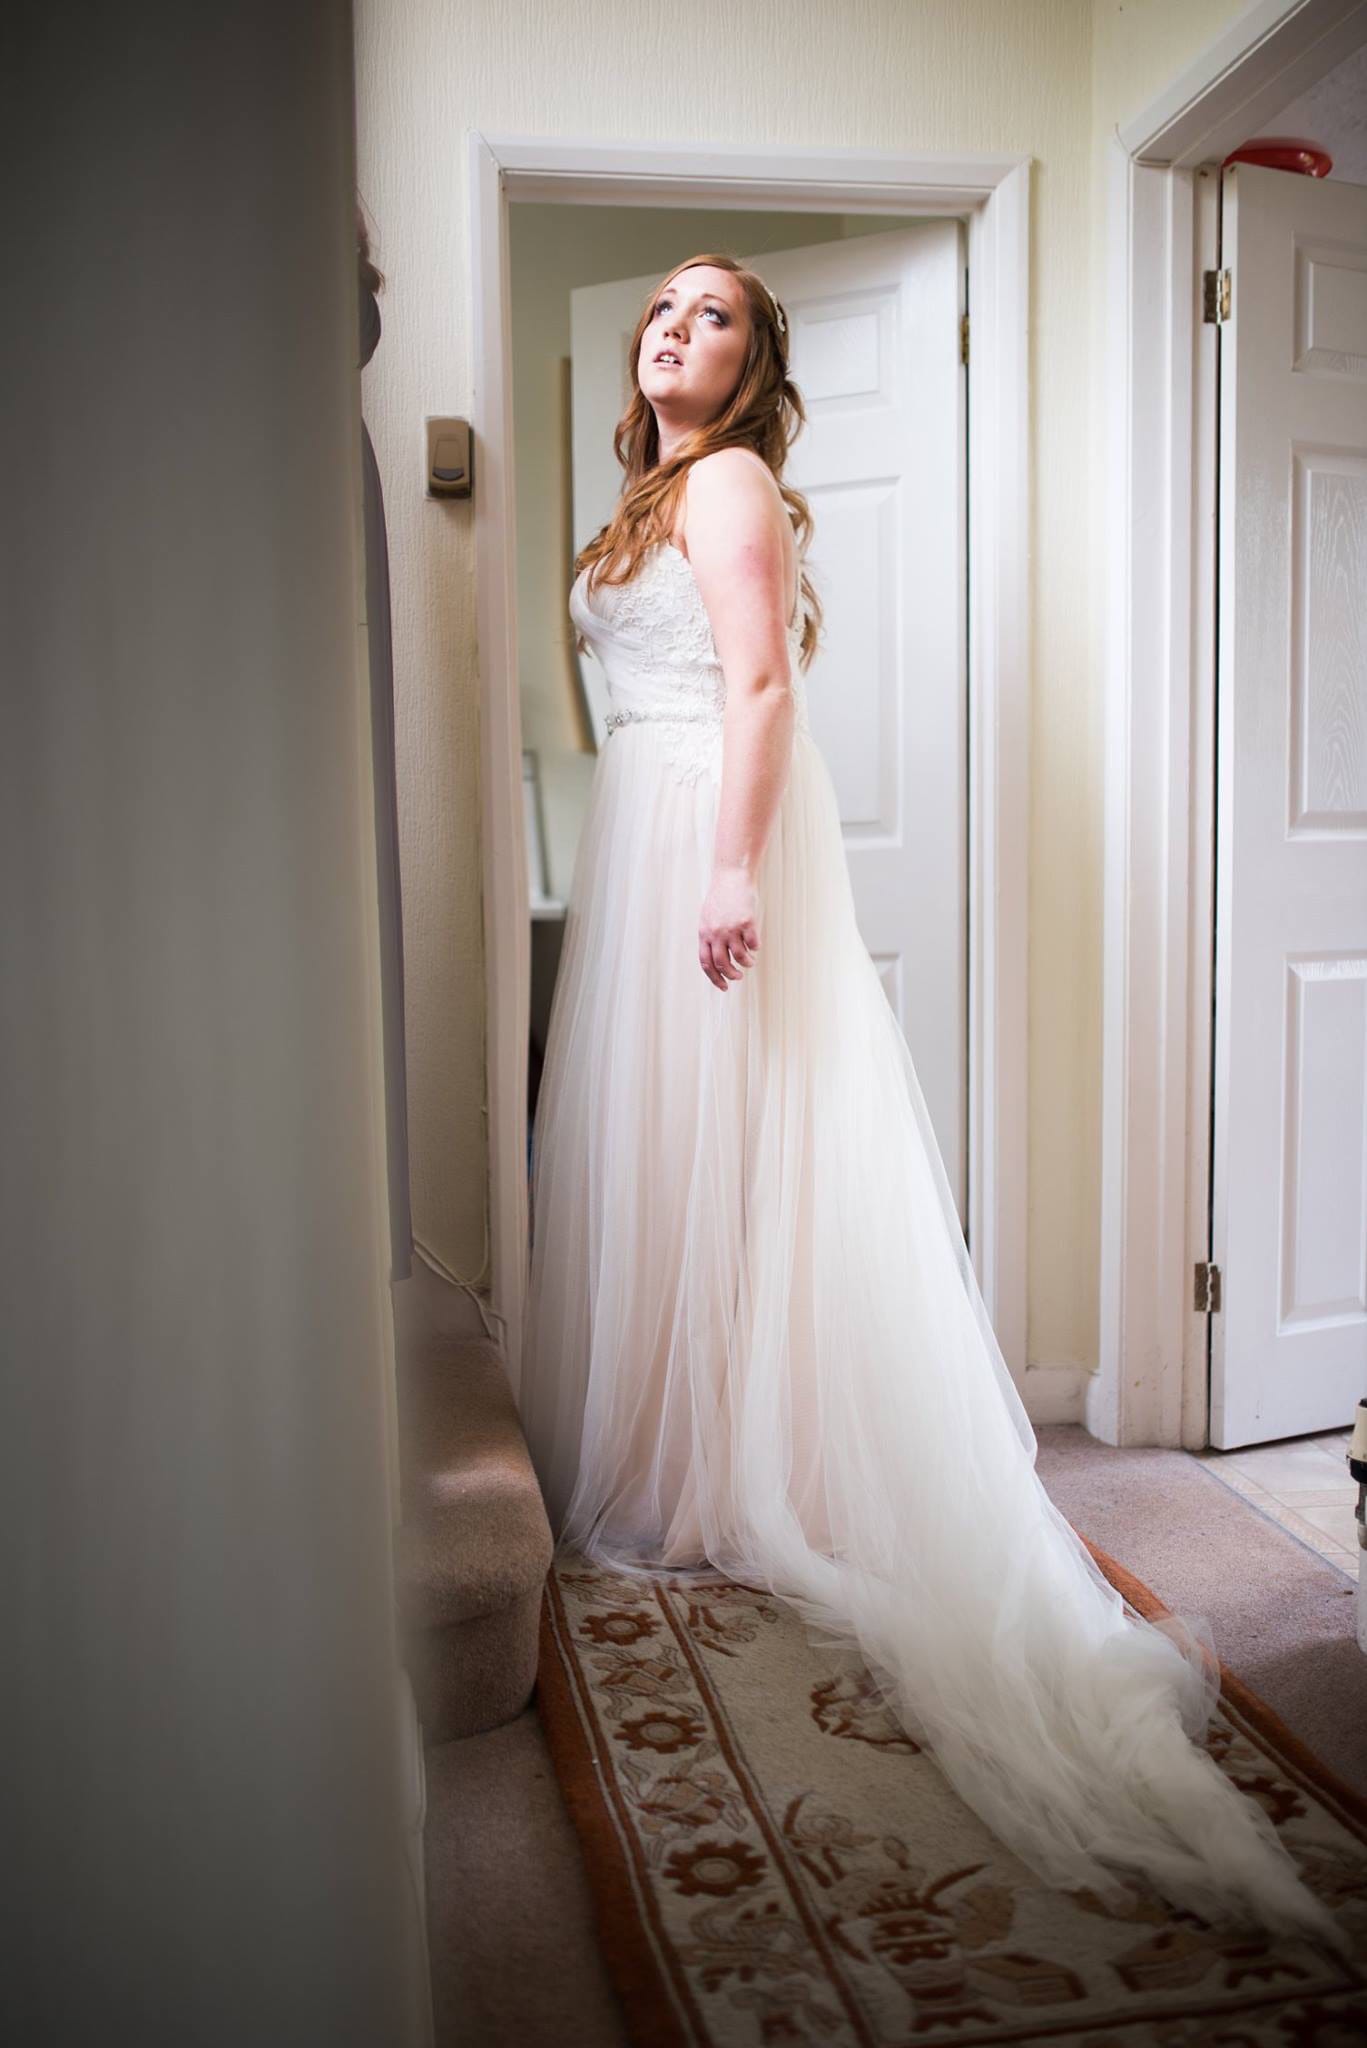 Customized Patience in Chic Vineyard Wedding - Maggie Bride wearing Patience by Maggie Sottero